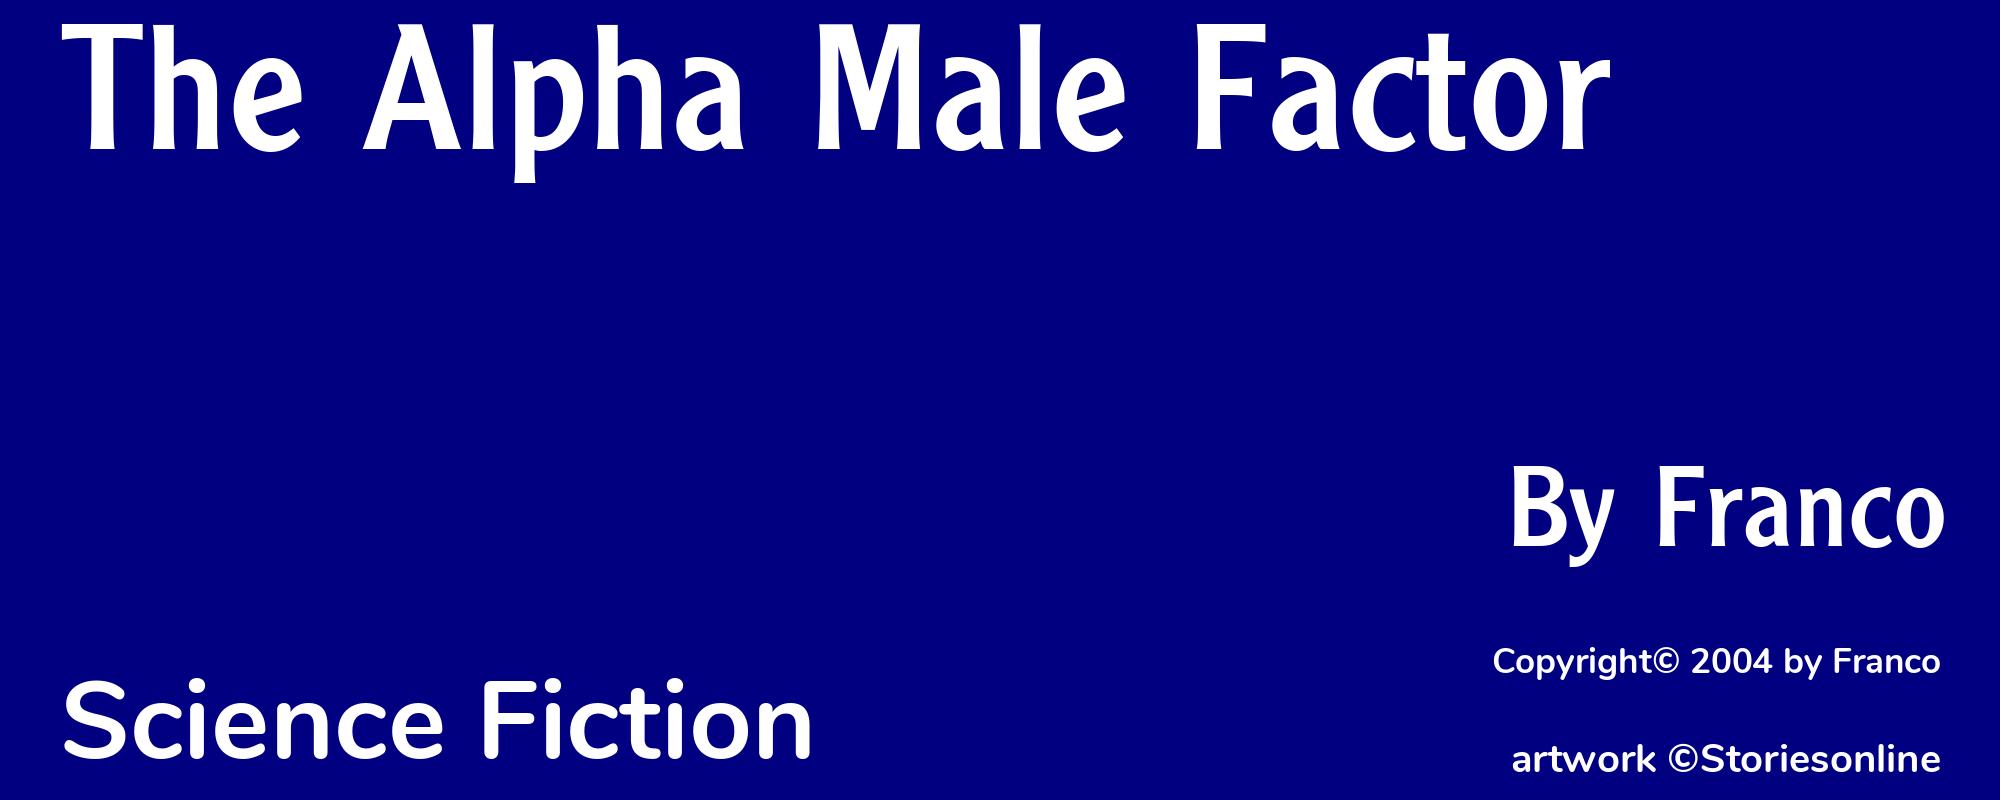 The Alpha Male Factor - Cover